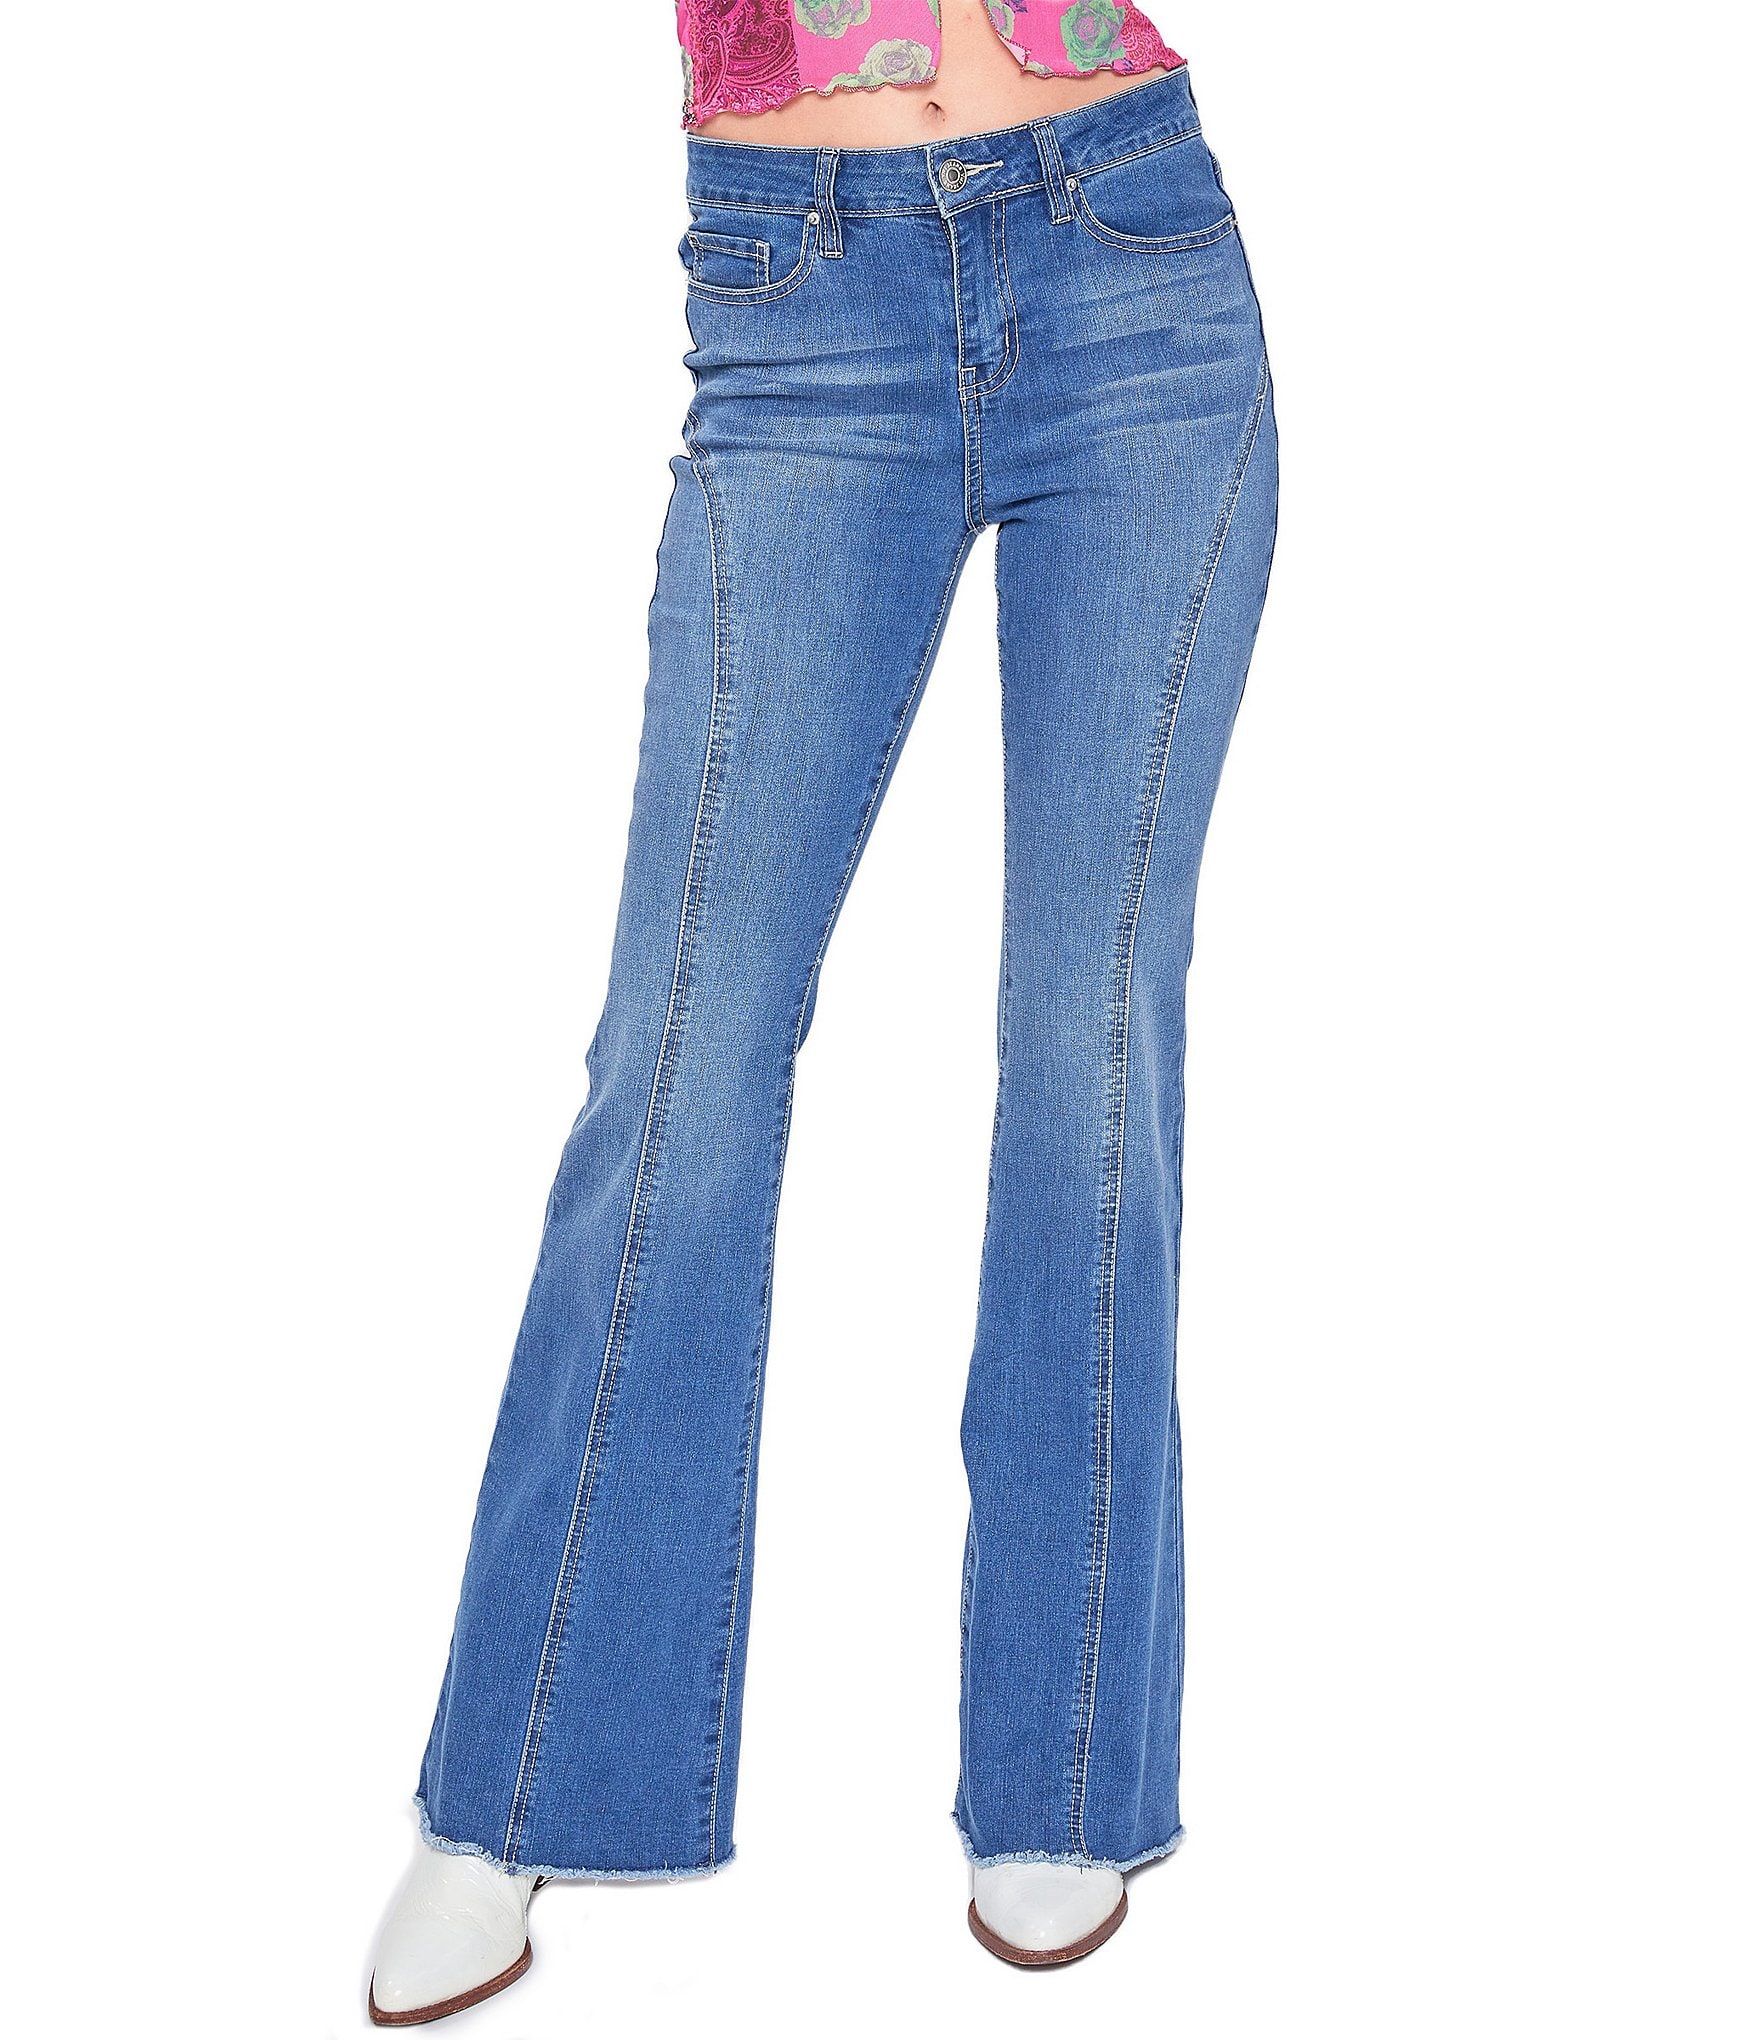 Ready For Anything High Waist Bell Bottom Flares With Ripped Knees And Fray  Hem - Light Blue